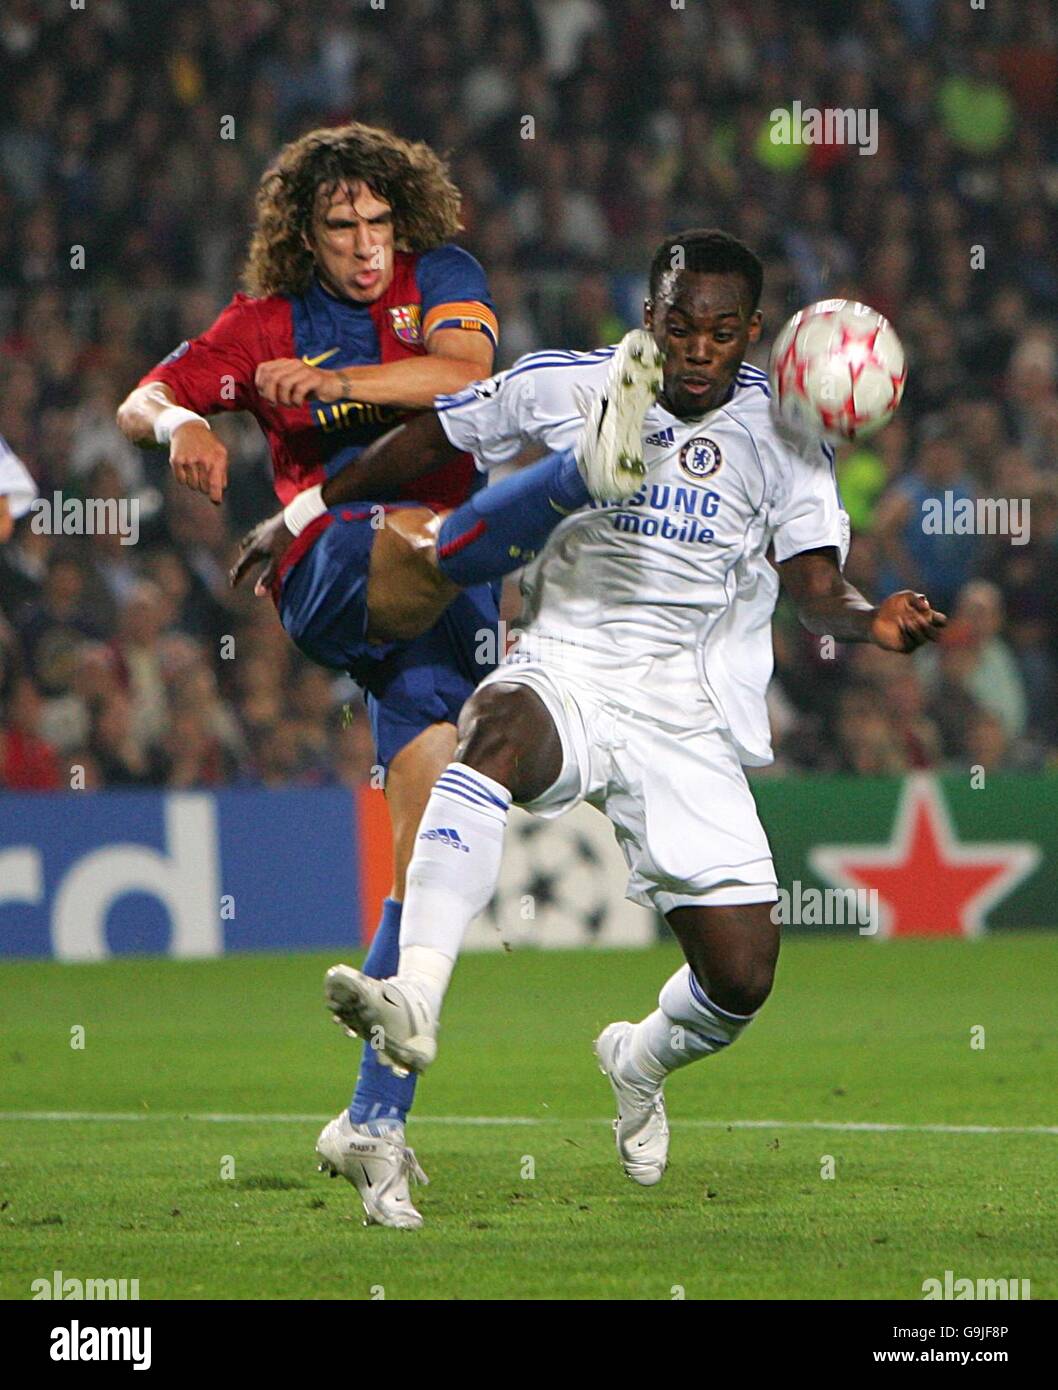 Soccer - UEFA Champions League - Group A - Barcelona v Chelsea - Nou Camp. Chelsea's Michael Essien and Barcelona's Carles Puyol battle for the ball Stock Photo